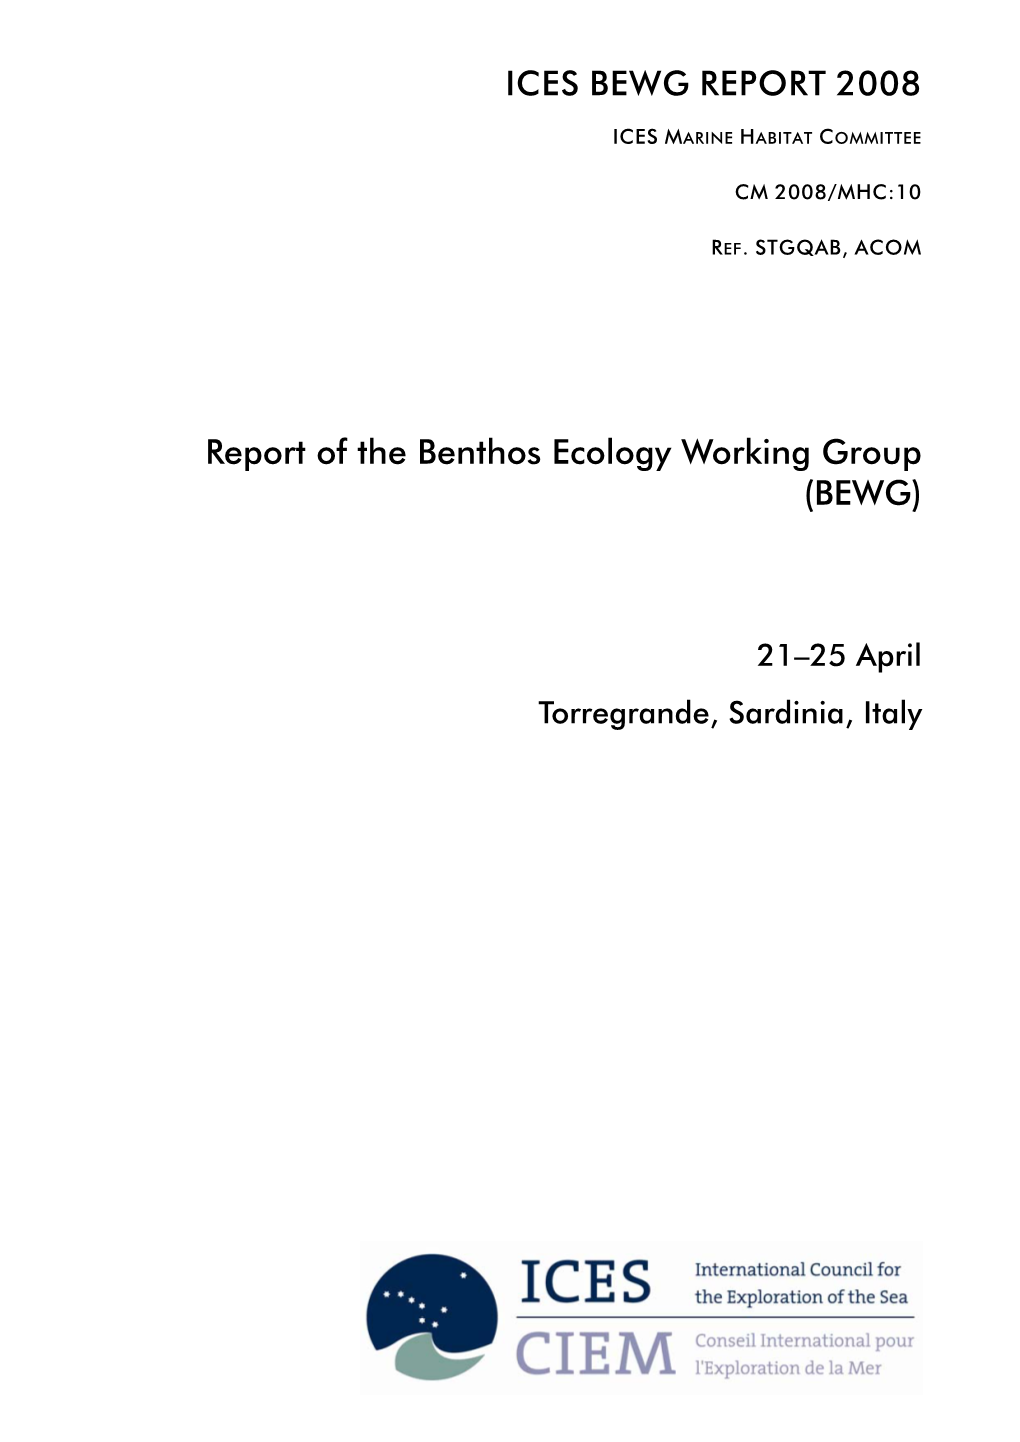 Report of the Benthos Ecology Working Group (BEWG)